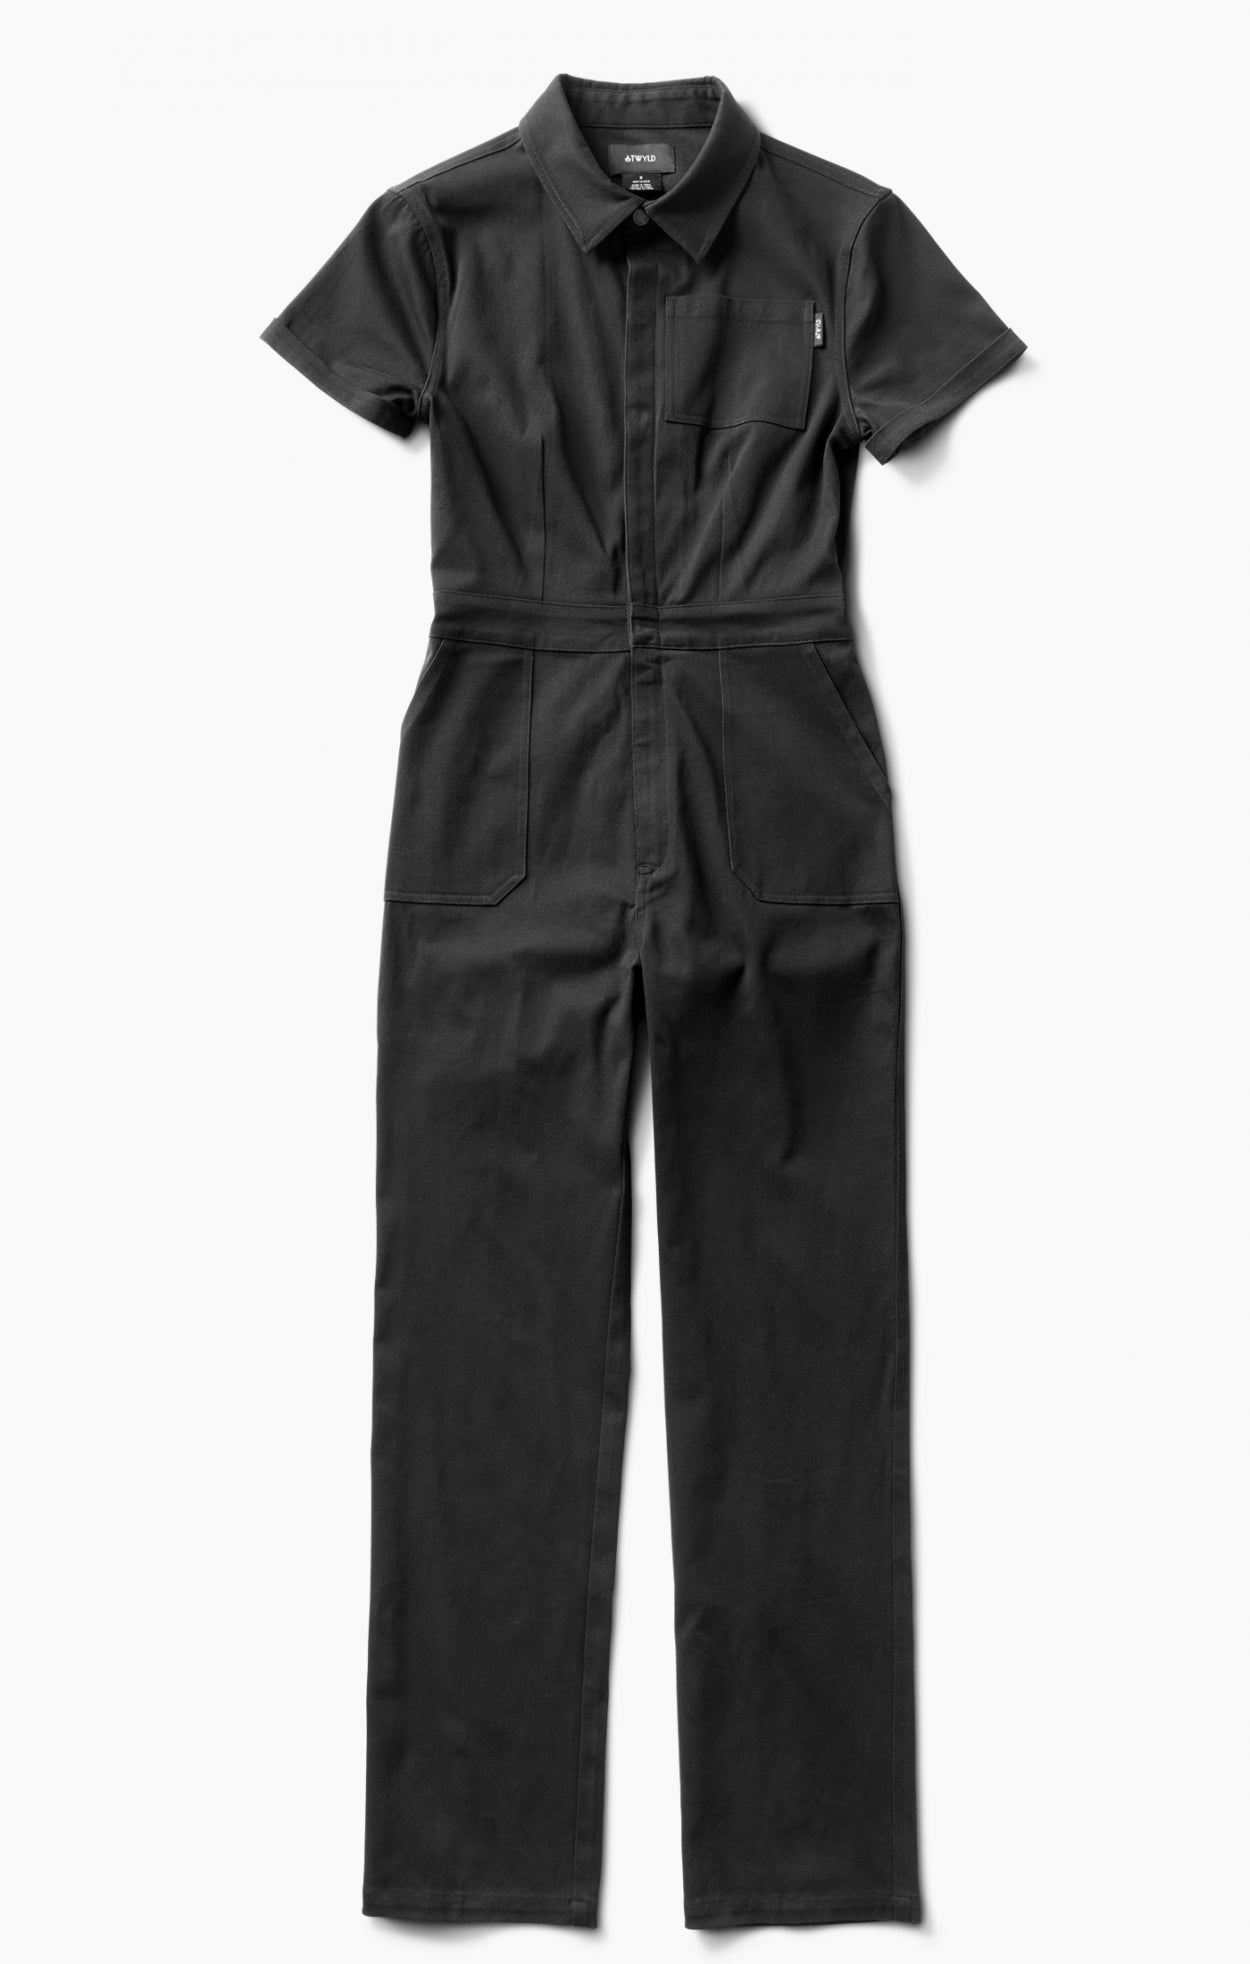 Atwyld Overall Pit Crew Black